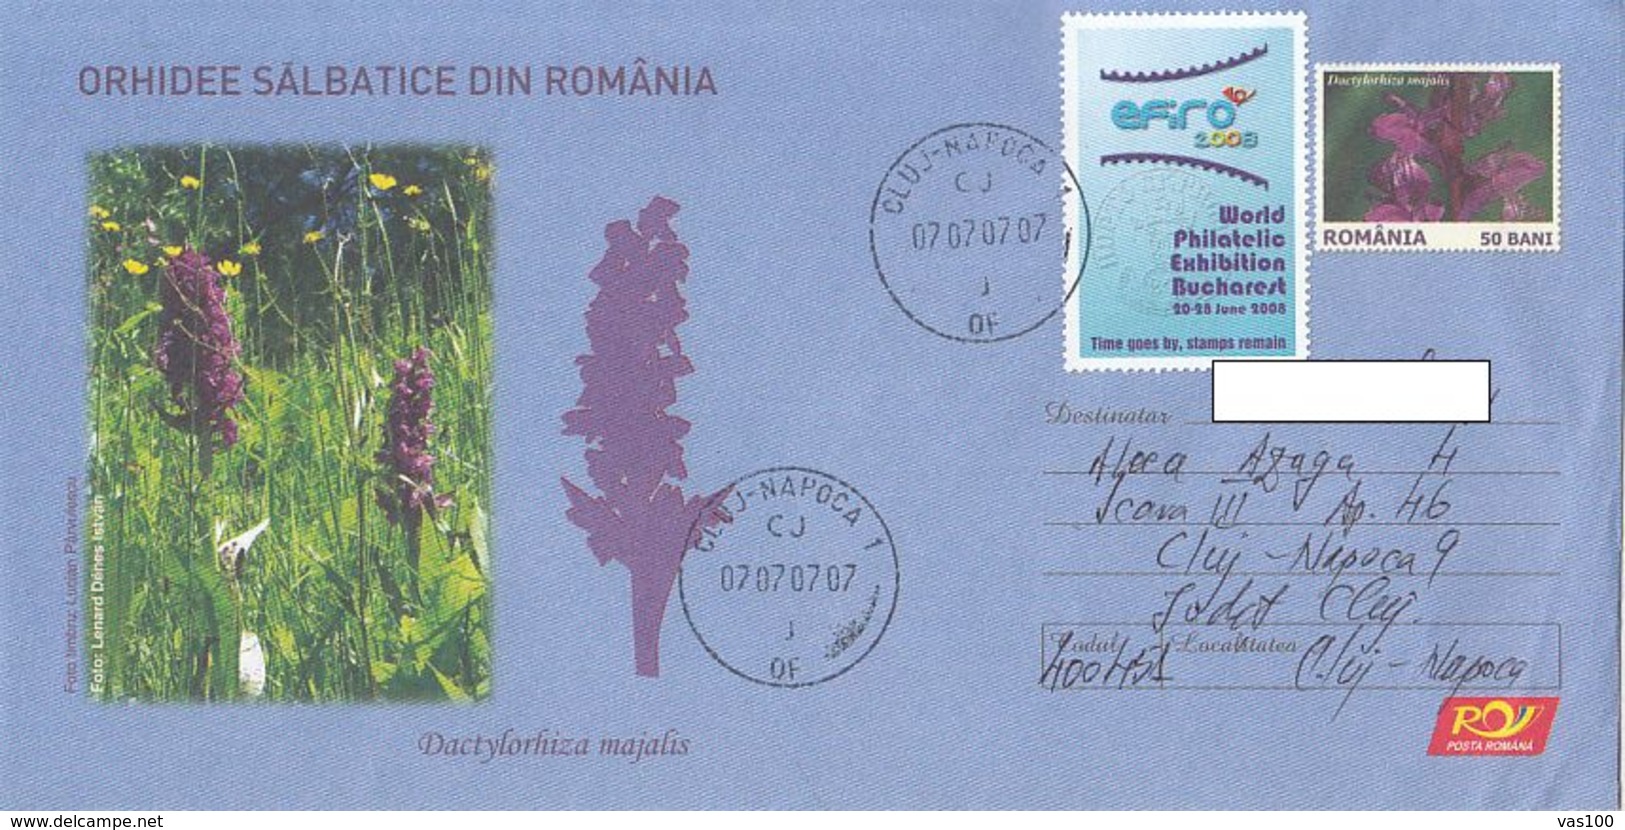 FLOWERS, ORCHIDS FROM ROMANIA, MARSH ORCHID, COVER STATIONERY, ENTIER POSTAL, 2007, ROMANIA - Orchidées